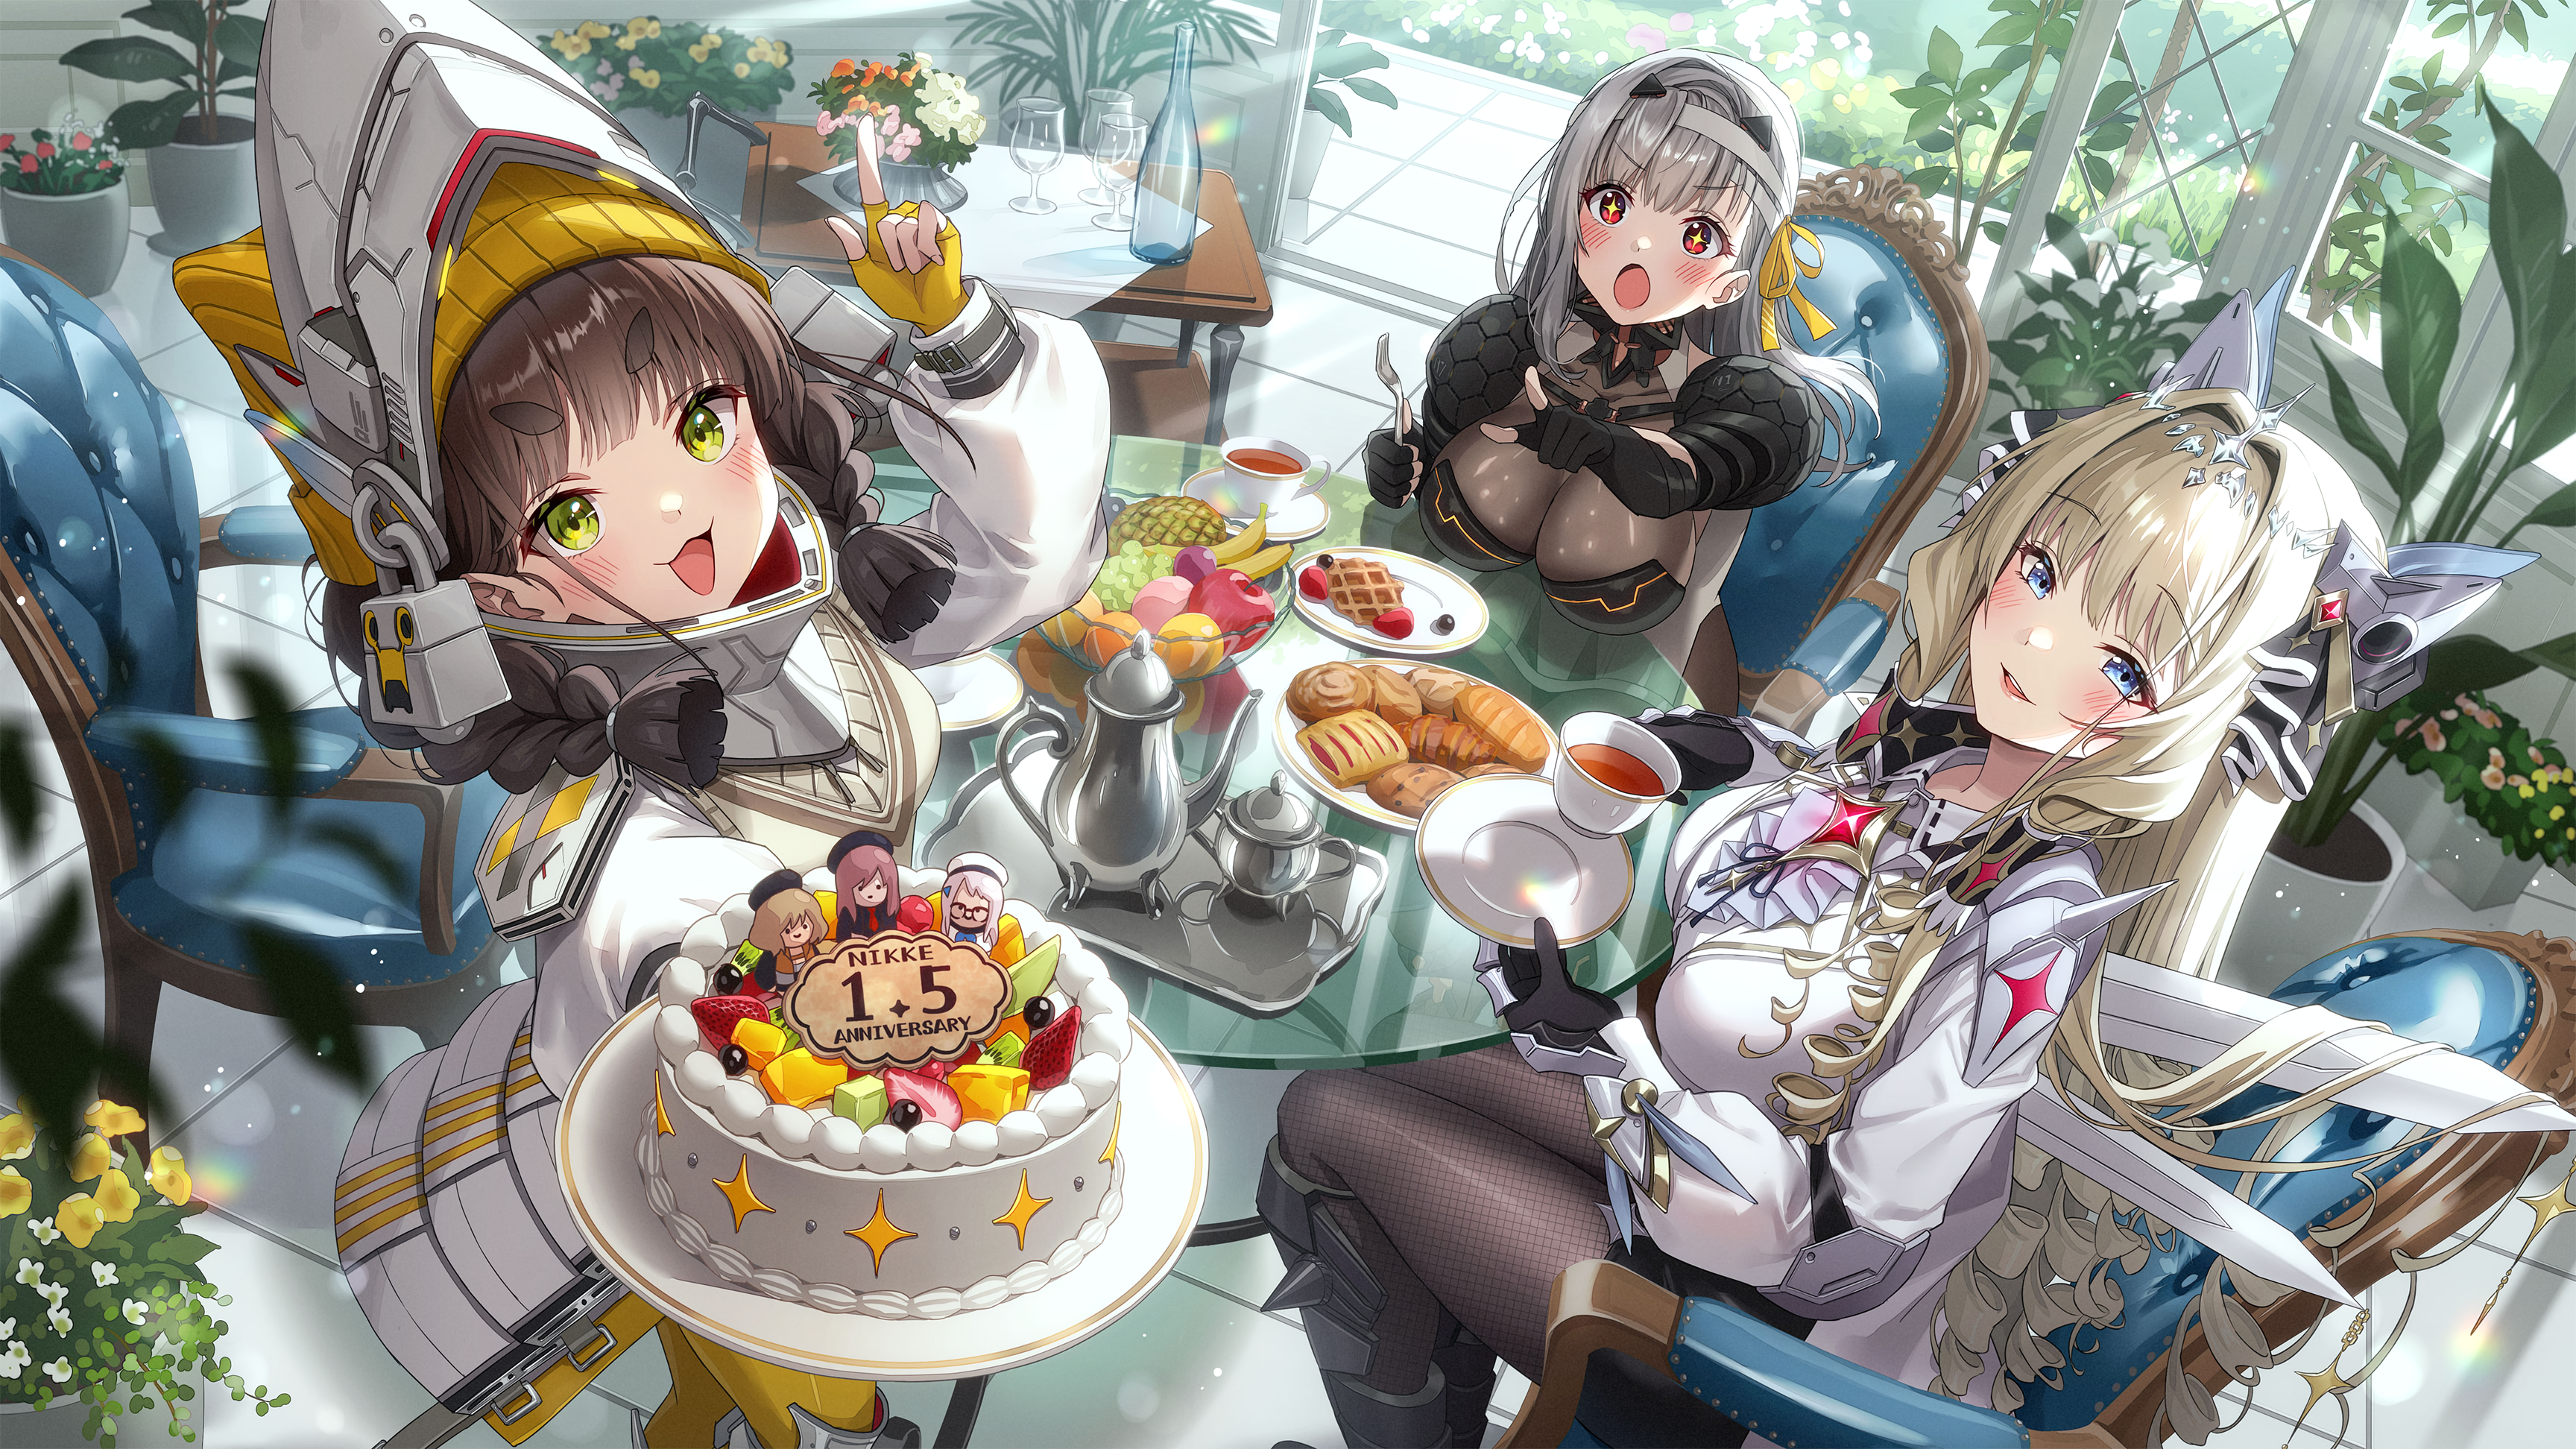 Anime 3456x1944 Nikke: The Goddess of Victory Chime (Nikke) blushing Crown (Nikke) long hair Modernia (Nikke: The Goddess of Victory) group of women pastries women trio anniversary big boobs open mouth finger pointing flowers pantyhose long sleeves looking at viewer cake food fruit plants Sonsoso hair ornament fork plates table tea drink sitting Pixiv